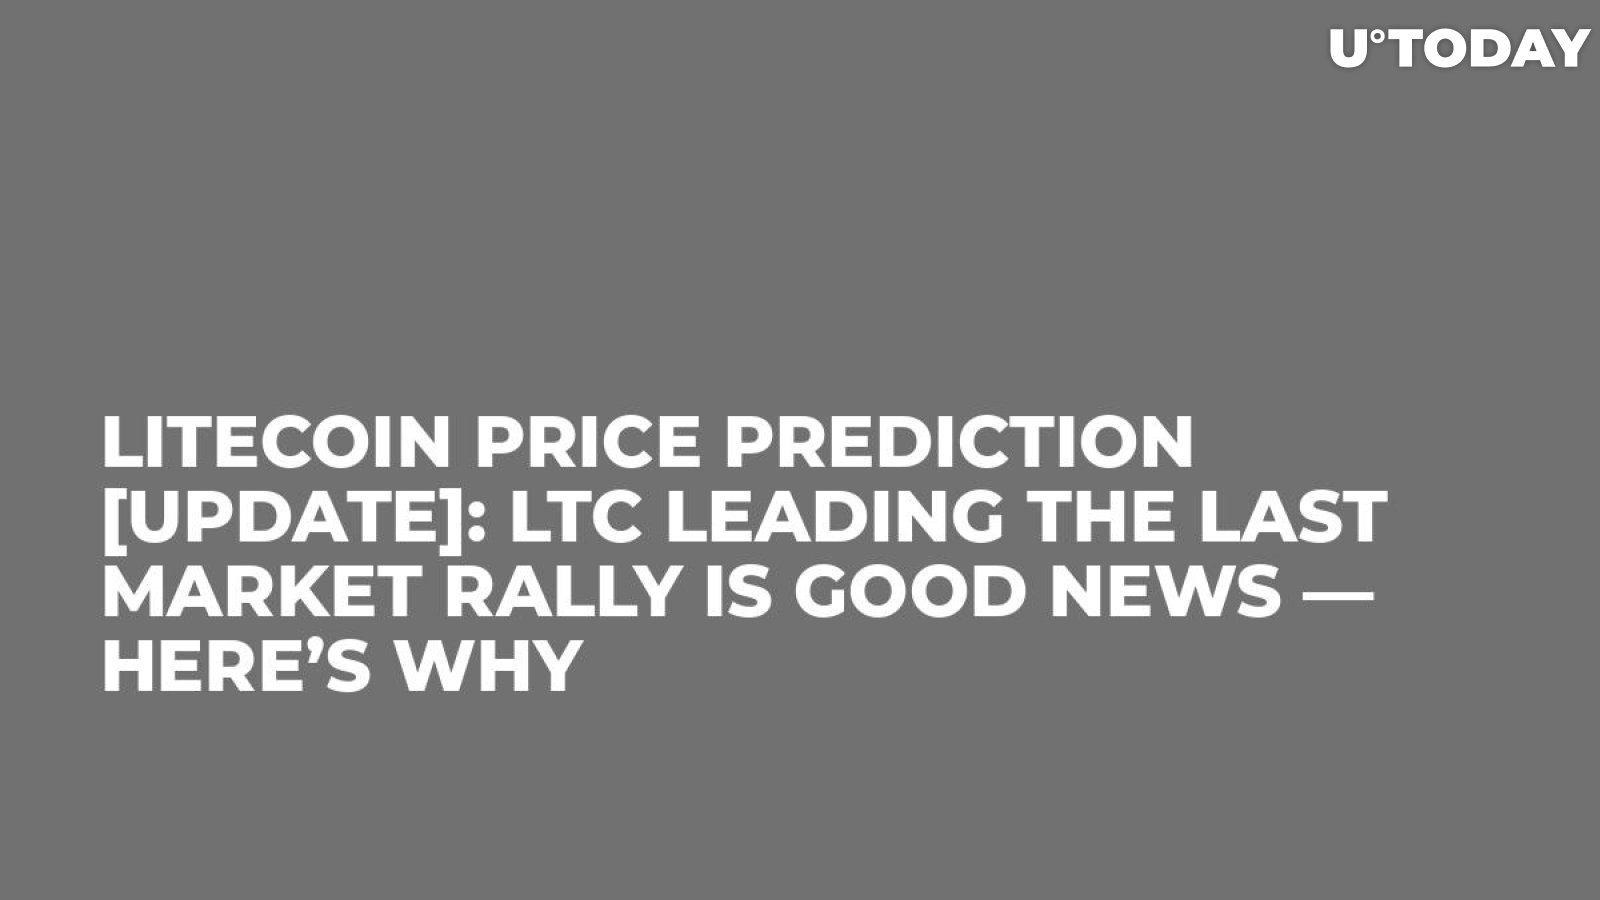 Litecoin Price Prediction [Update]: LTC Leading the Last Market Rally Is Good News — Here’s Why